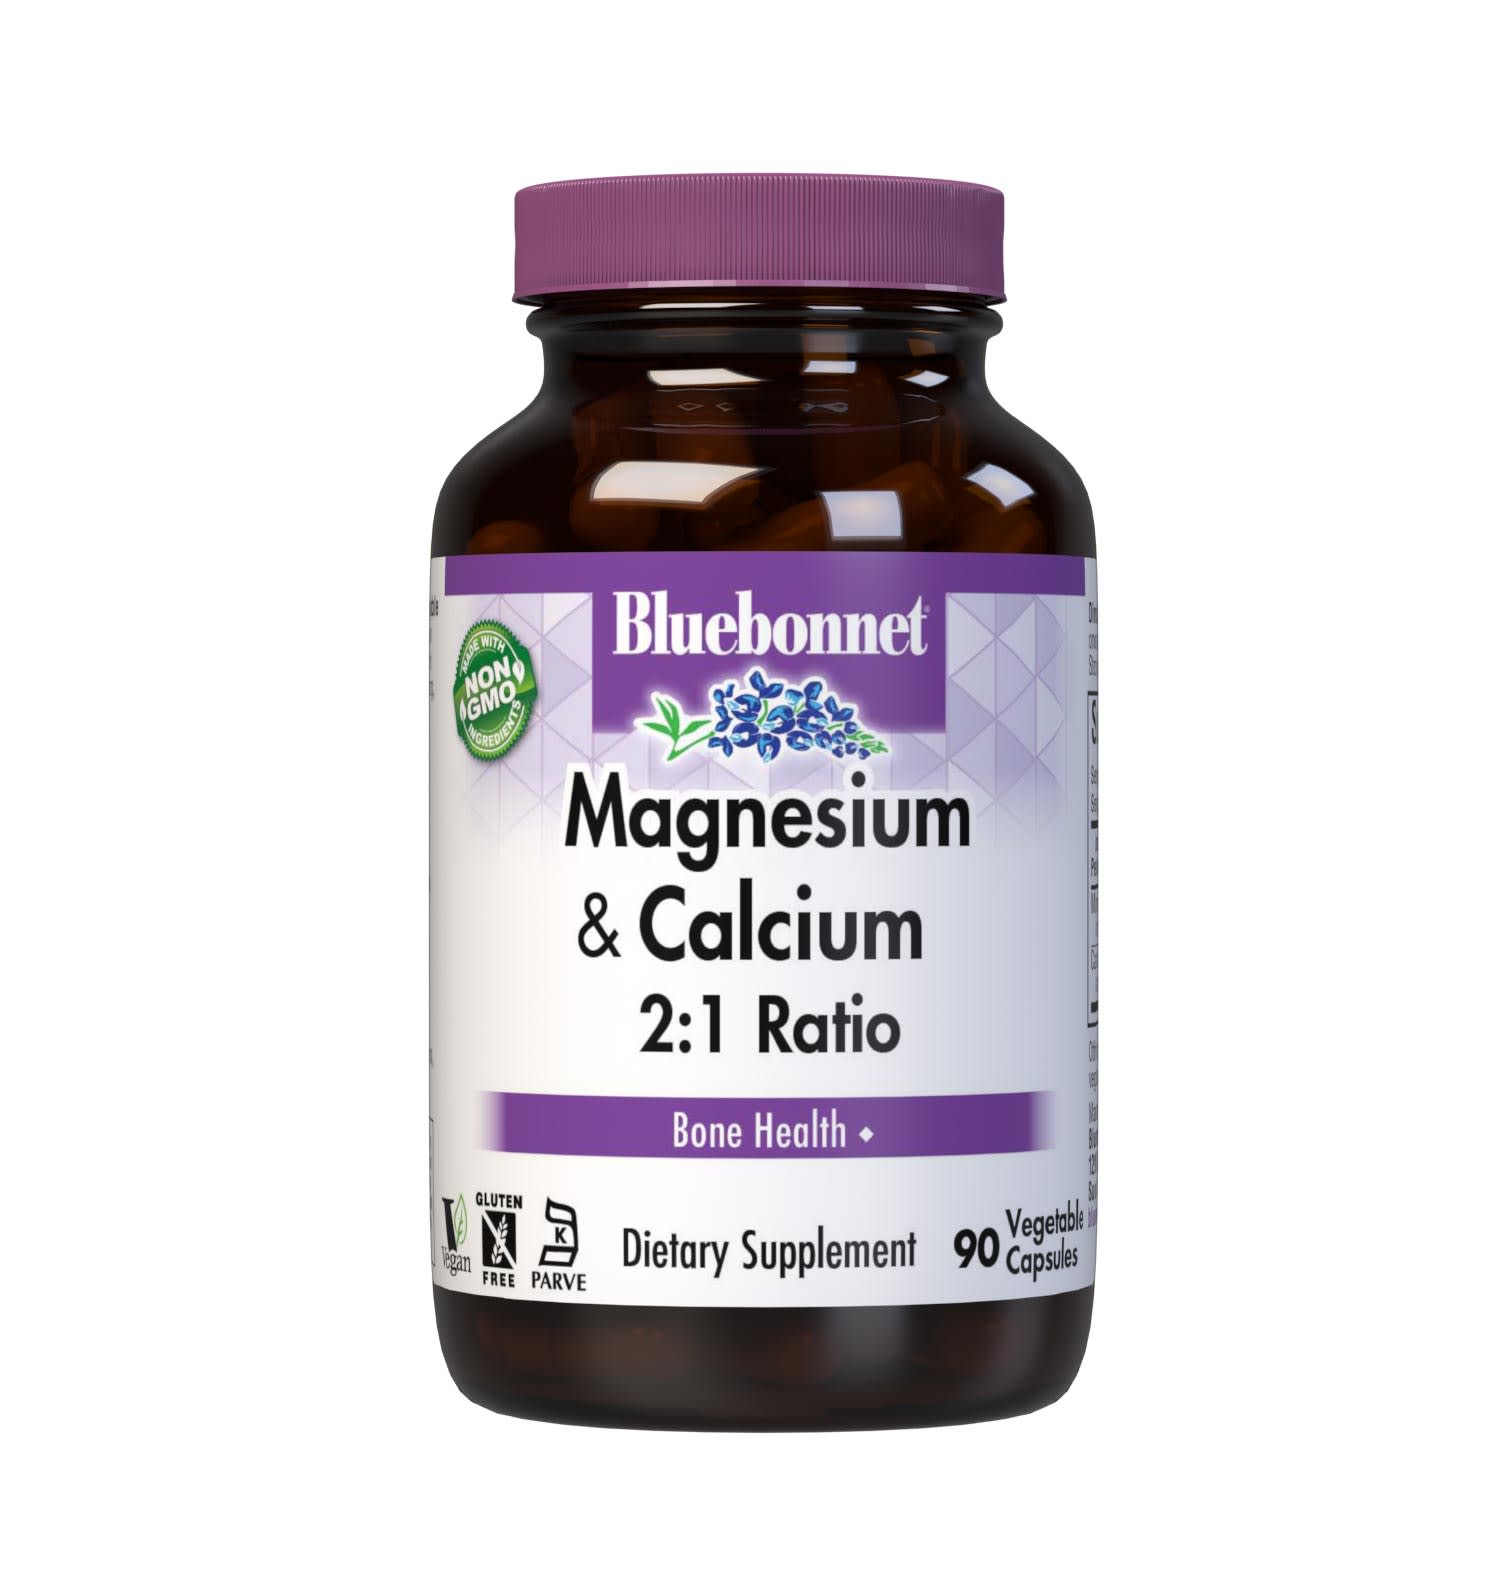 Bluebonnet's Magnesium & Calcium 2:1 90 Vegetable Capsules are formulated with a 2:1 ratio of magnesium from fully reacted magnesium aspartate, plus calcium in a chelate of calcium citrate and malate. #size_90 count